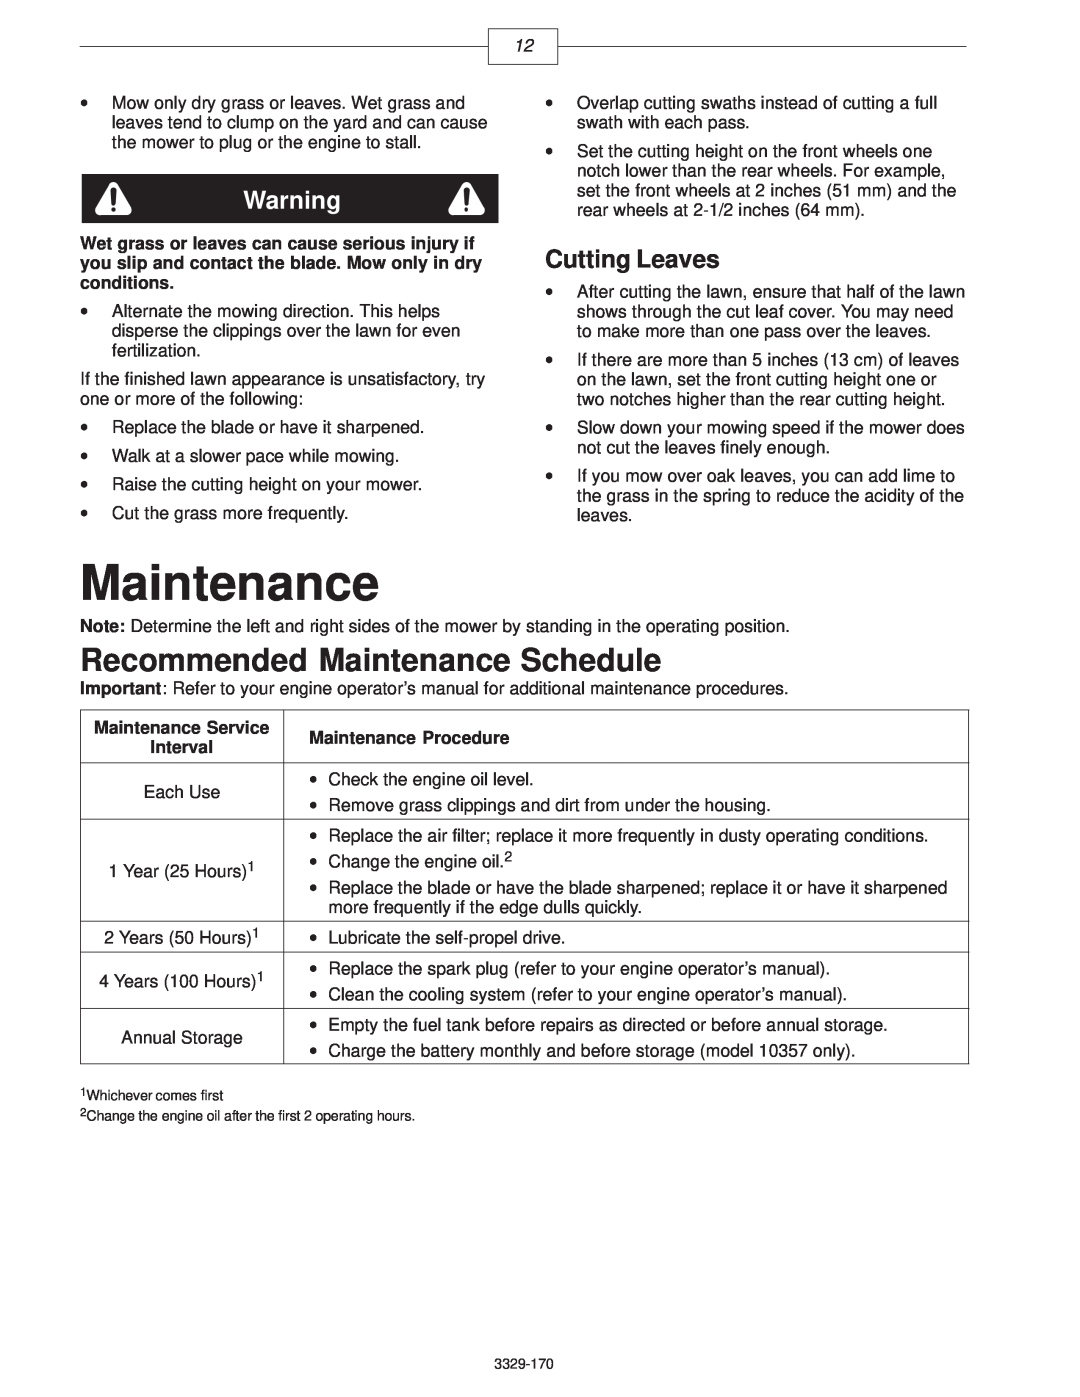 Lawn-Boy 10356, 10357, 10358 manual Recommended Maintenance Schedule, Cutting Leaves, Maintenance Service 